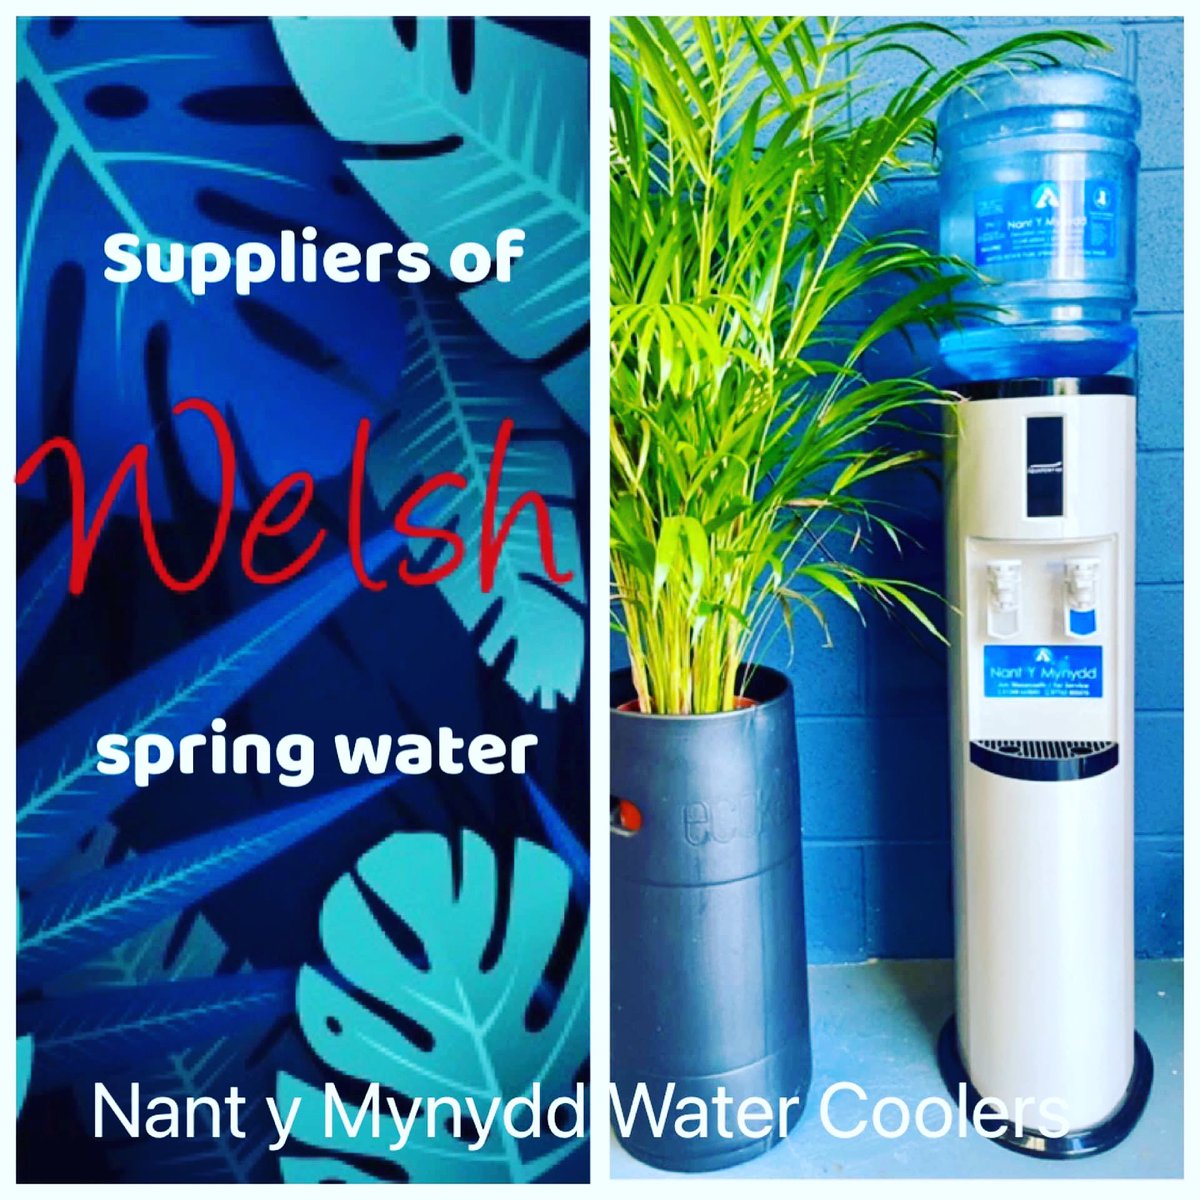 If you’re looking for a water cooler for your business or home, we can help!

We have a range of water coolers to choose from.

For more information, check out our website 👇

nantymynyddwatercoolers.co.uk

#welshspringwater #localbusiness 

@NYMWaterCoolers